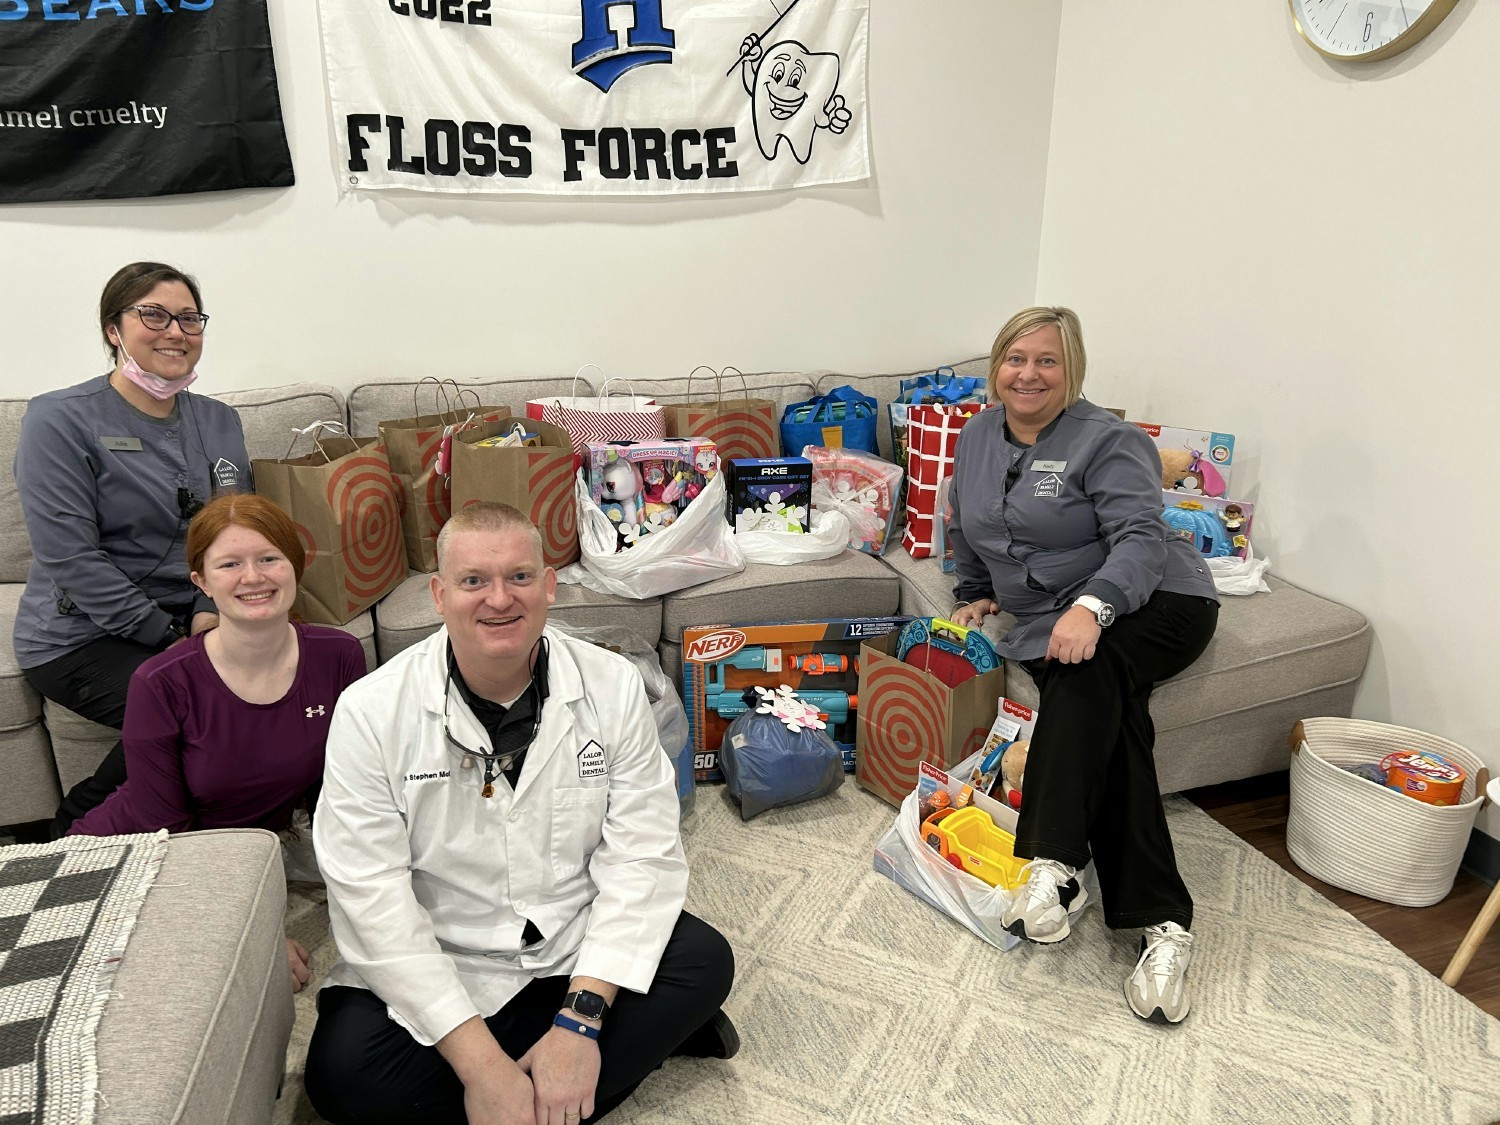 Our team collected donations and toys over the holiday season to donate to our local foster care program. 